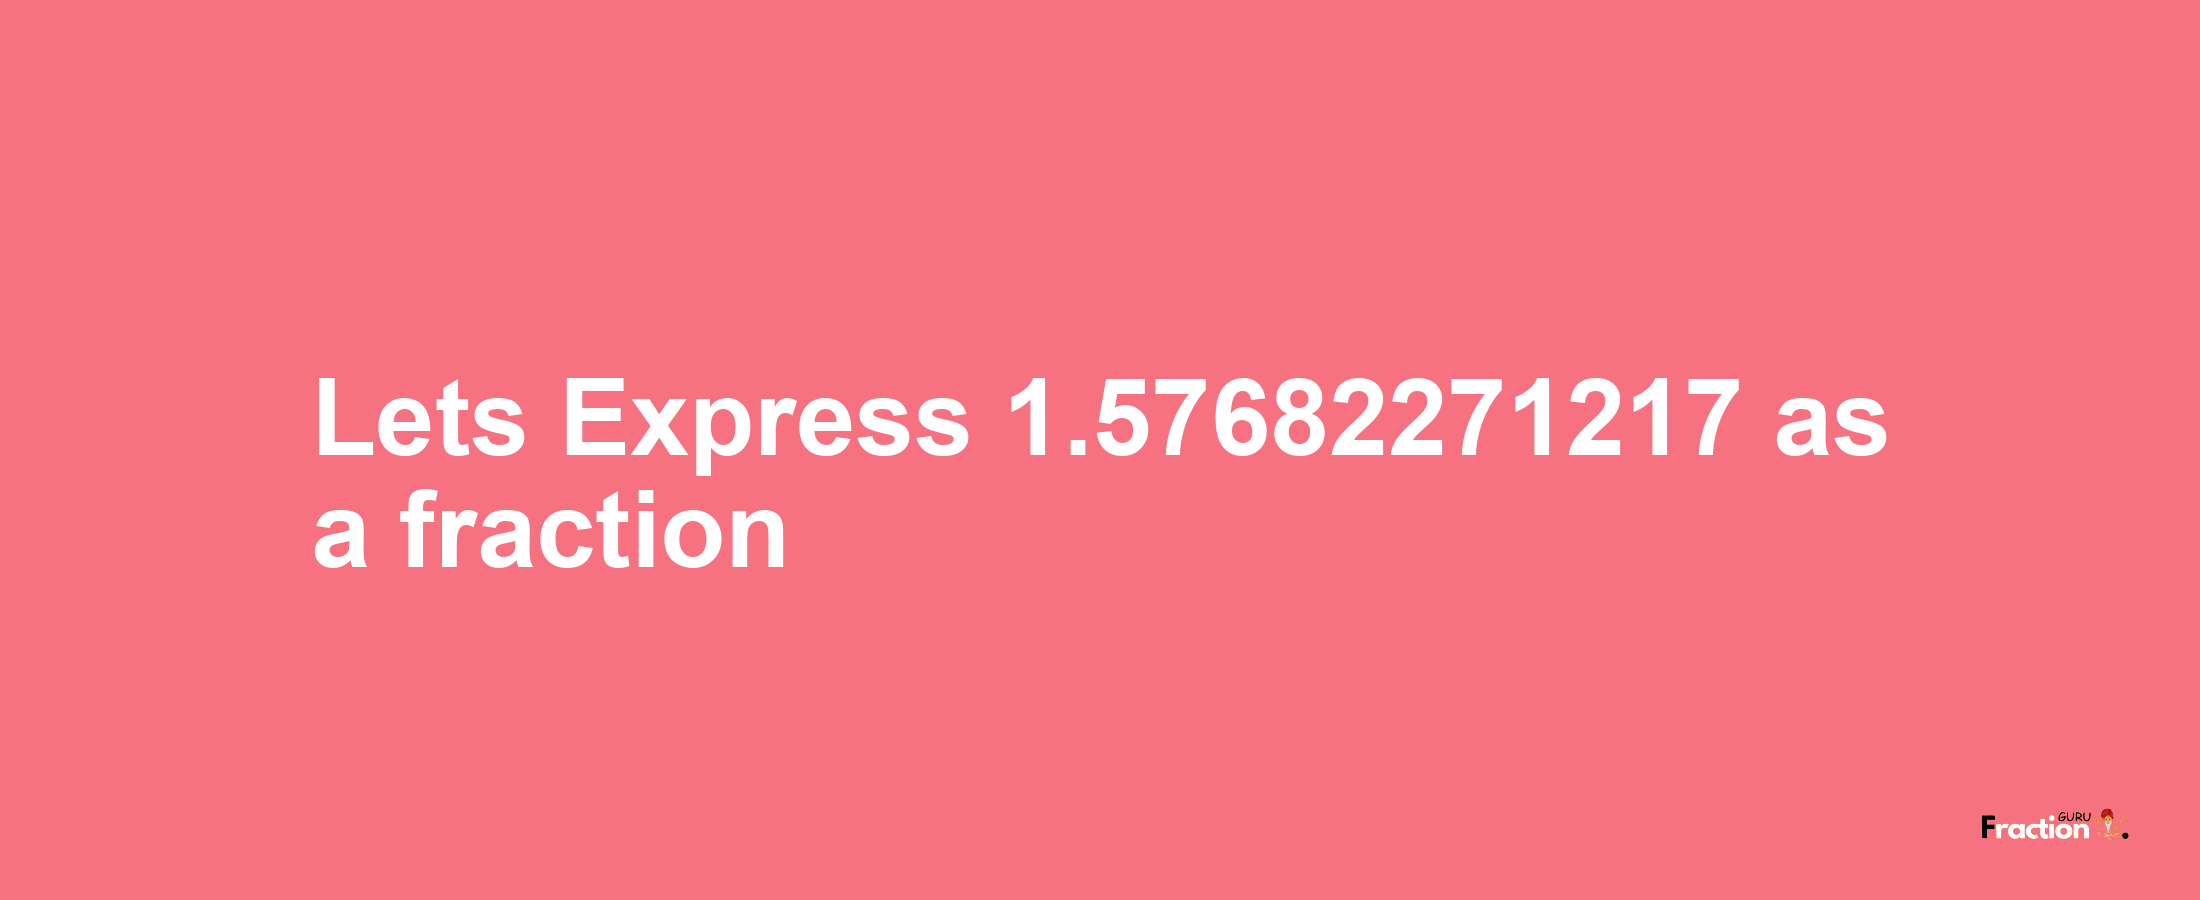 Lets Express 1.57682271217 as afraction